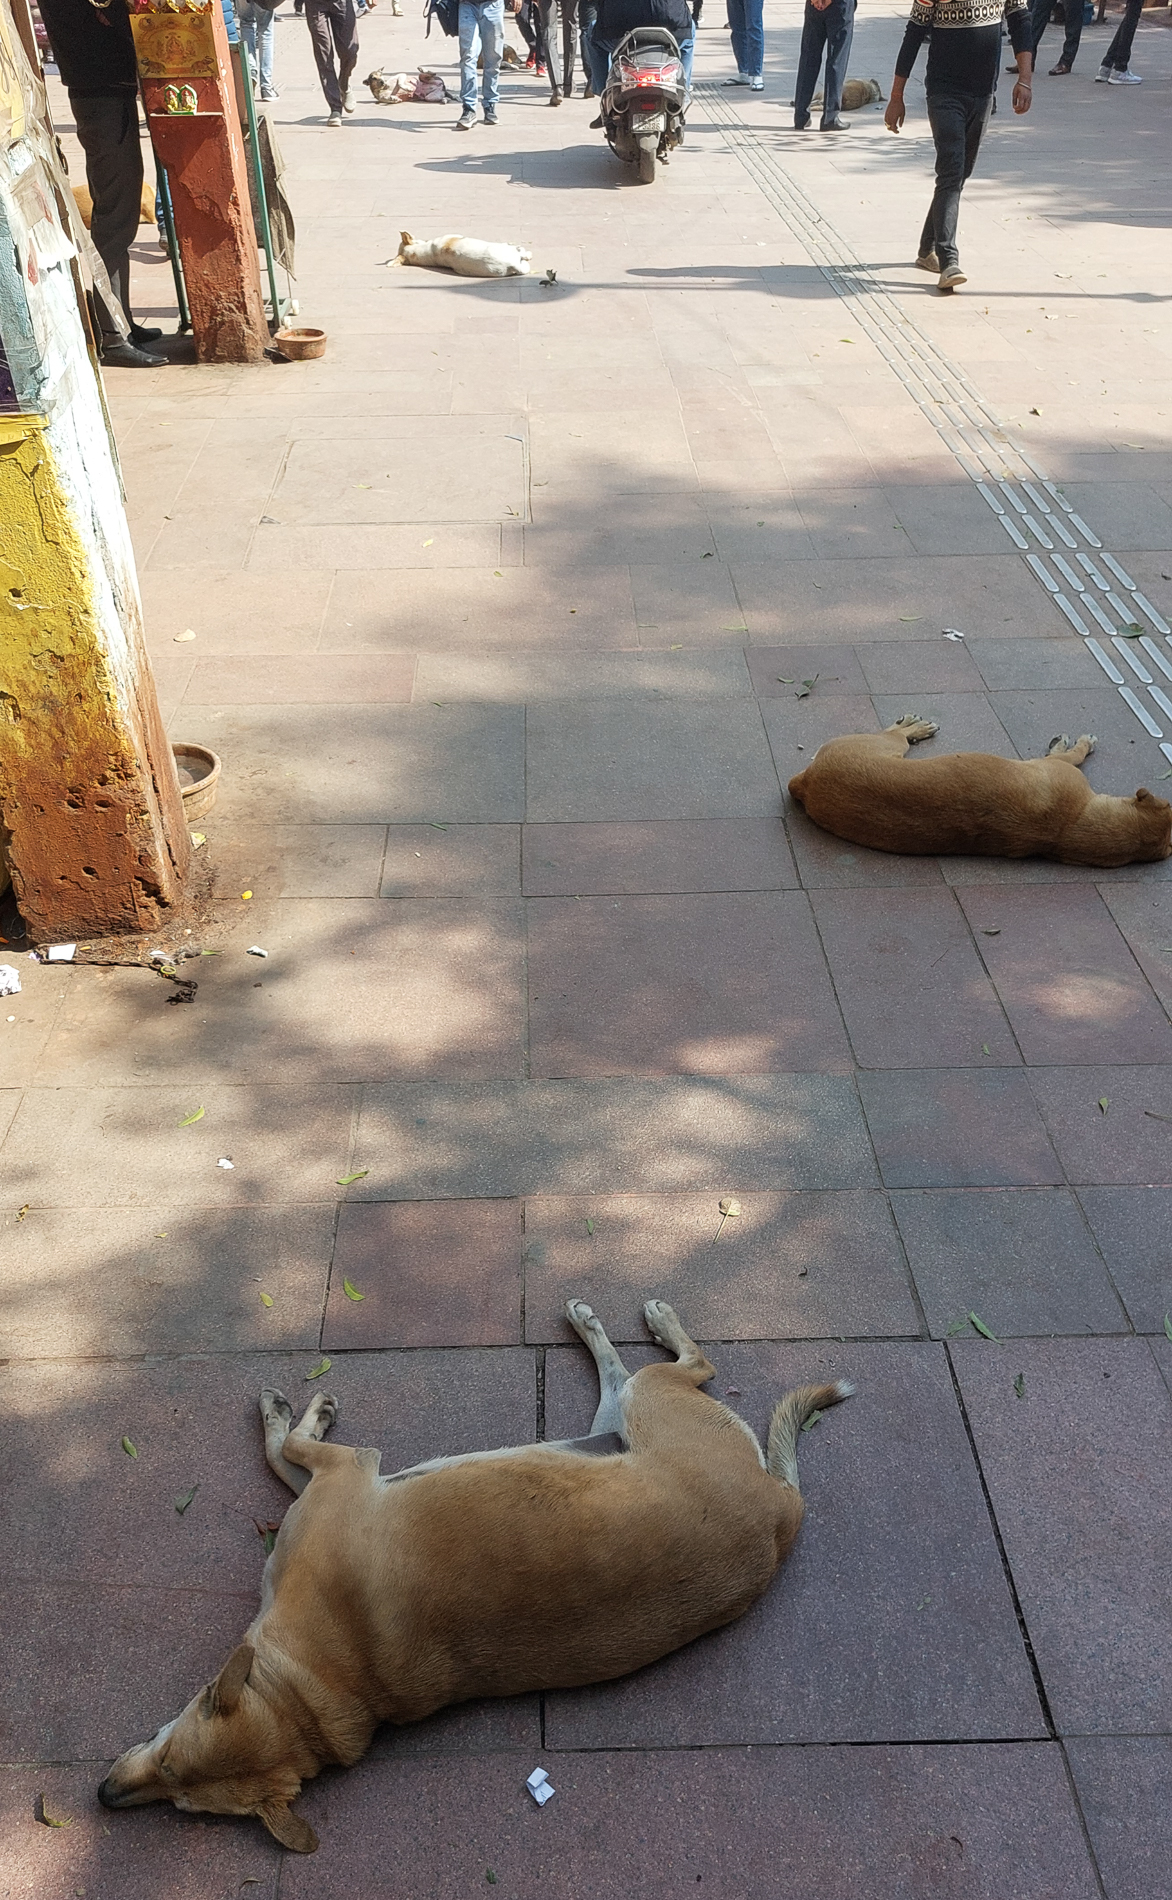 <span  class="uc_style_uc_tiles_grid_image_elementor_uc_items_attribute_title" style="color:#ffffff;">In Delhi Old Town also the dogs sometimes are lieing around on the streets</span>